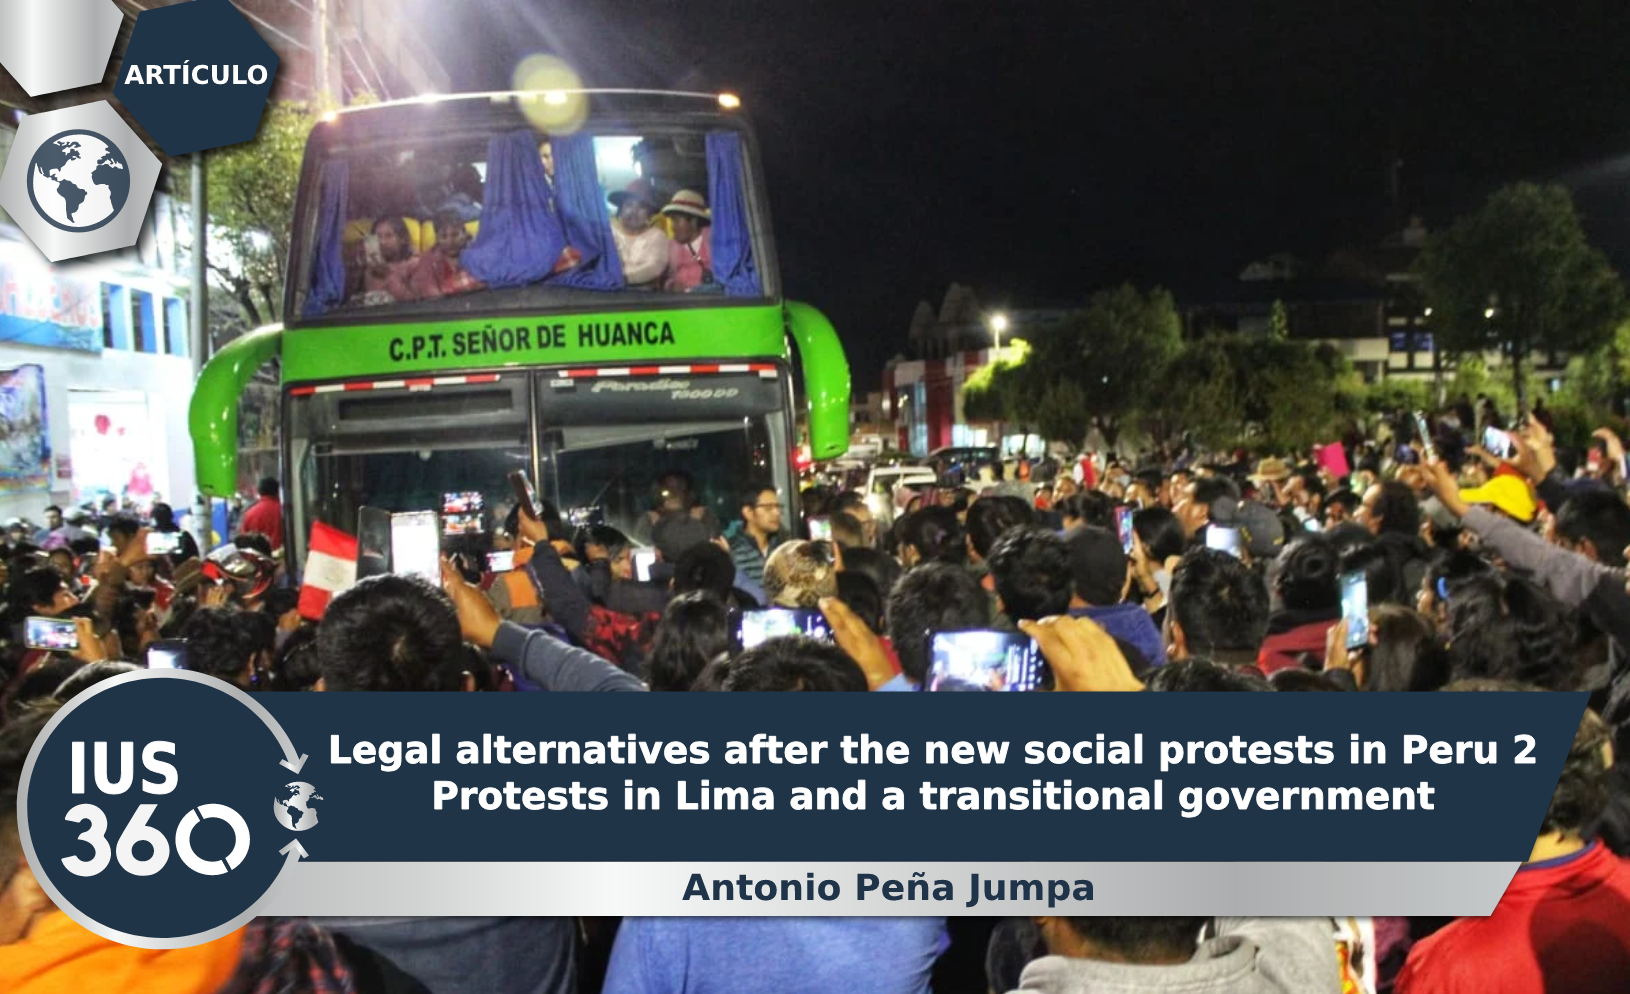 Legal alternatives after the new social protests in Peru 2. Protests in Lima and a transitional government | Antonio Peña Jumpa